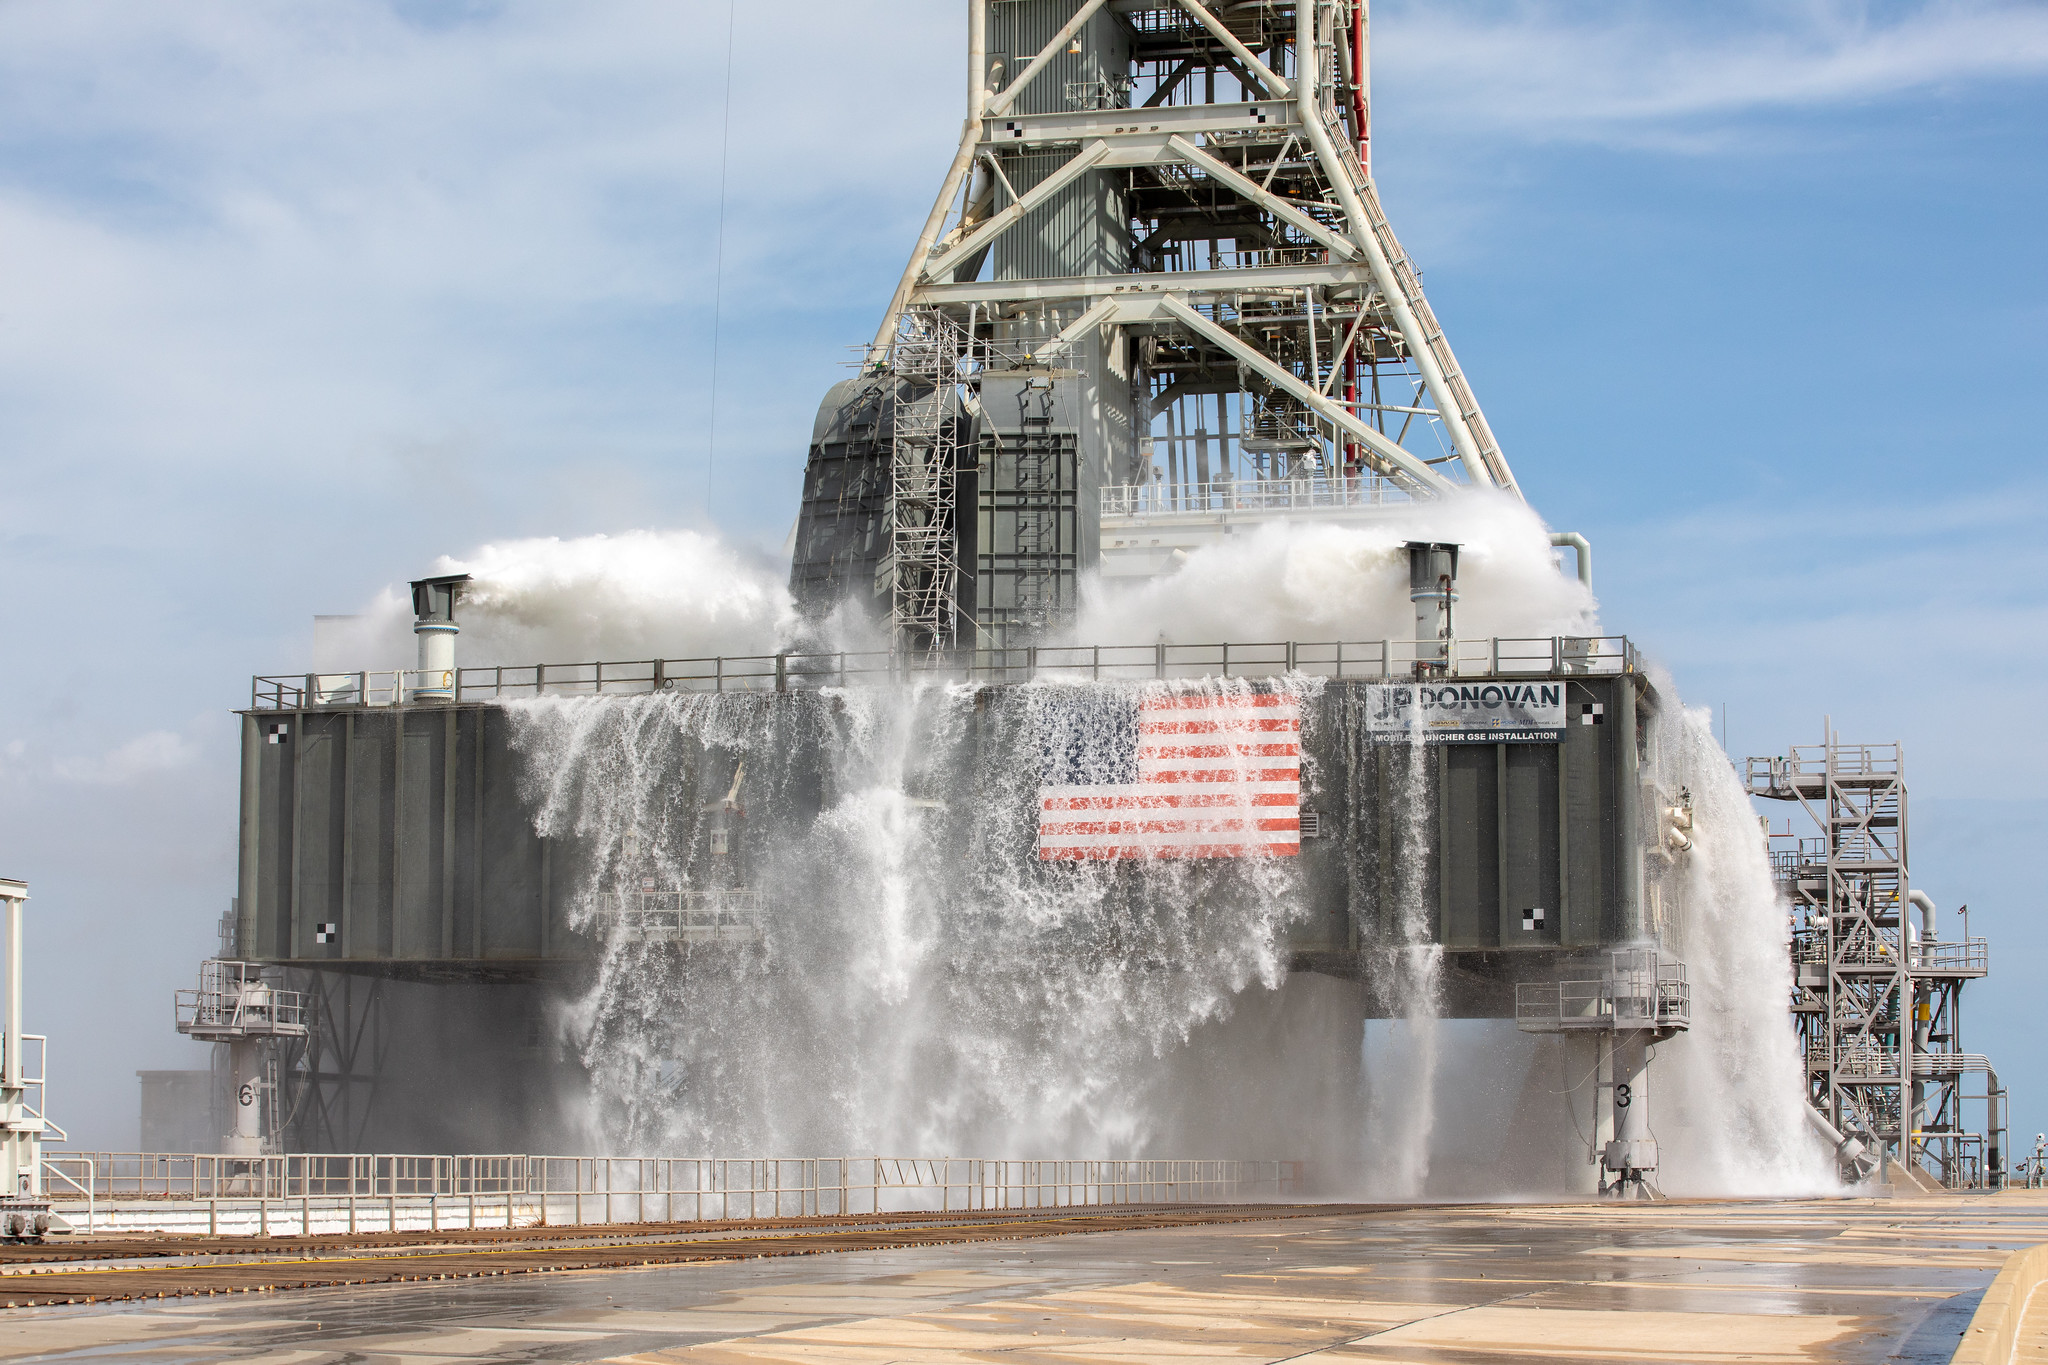 NASA eclipsed a milestone with its latest successful water flow test on the mobile launcher.